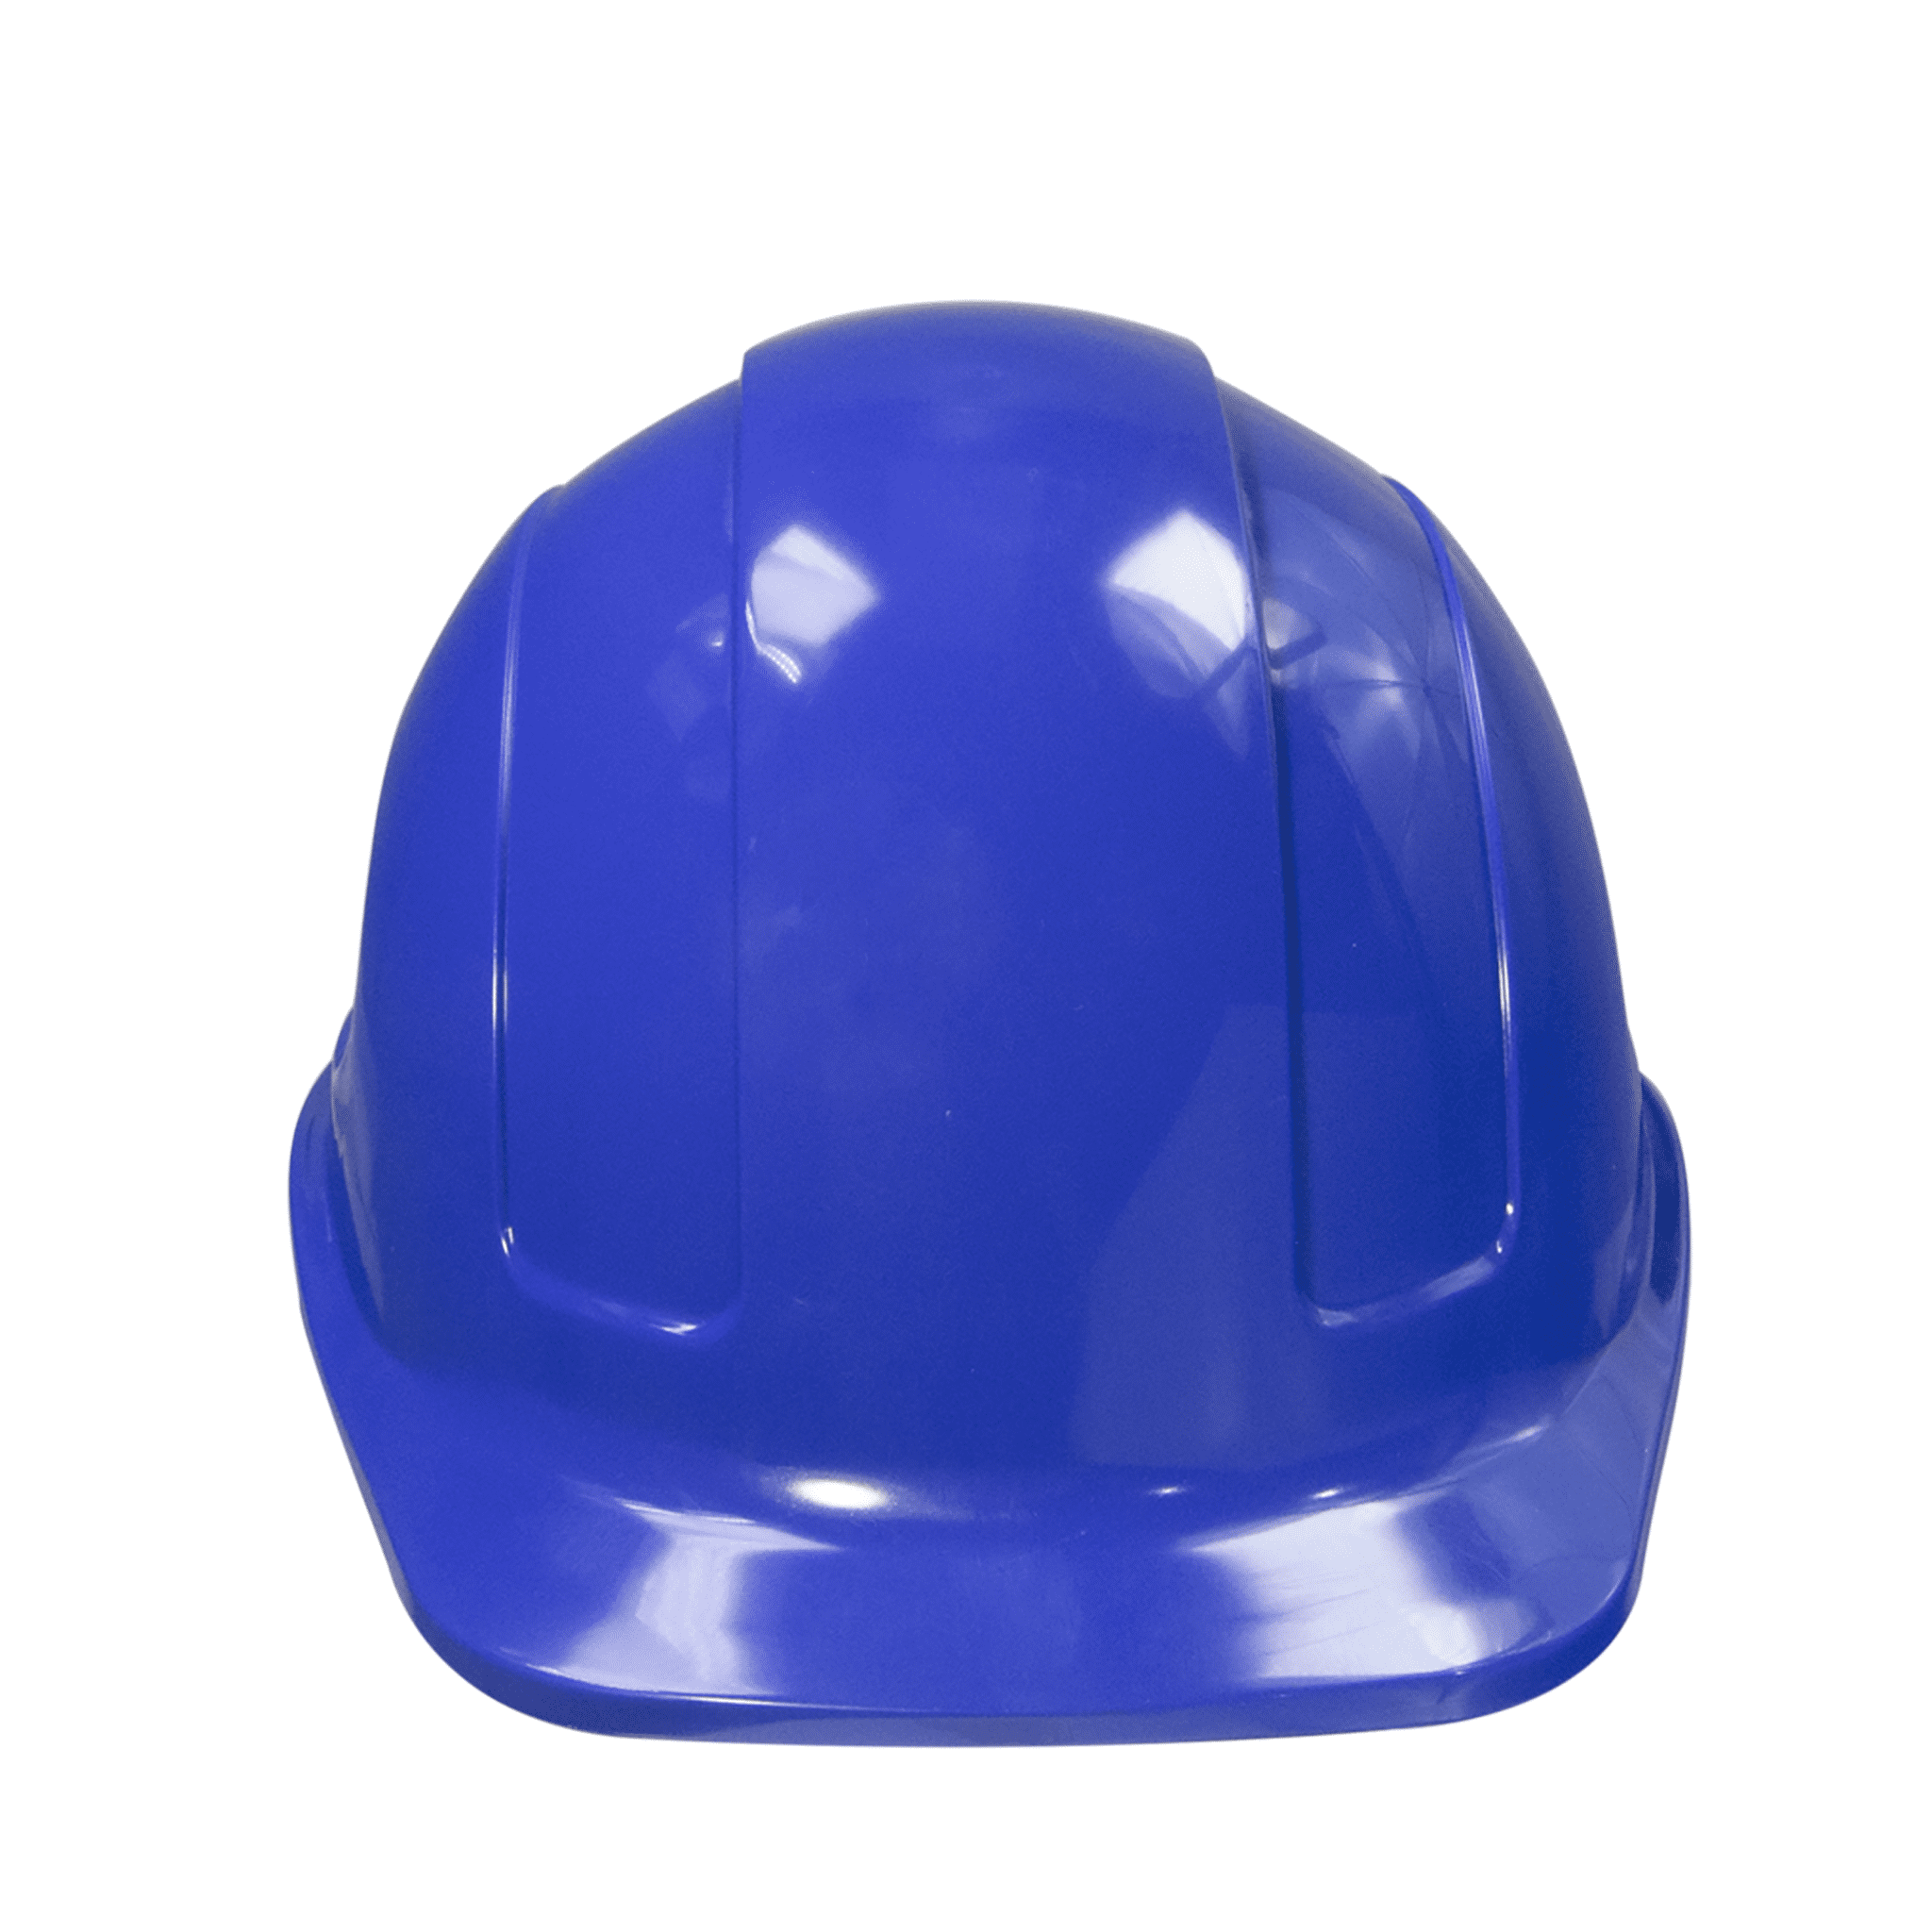 JORESTECH Safety Hard Hat with Front Brim and 4-Point Suspension, HHAT-01  (Green)